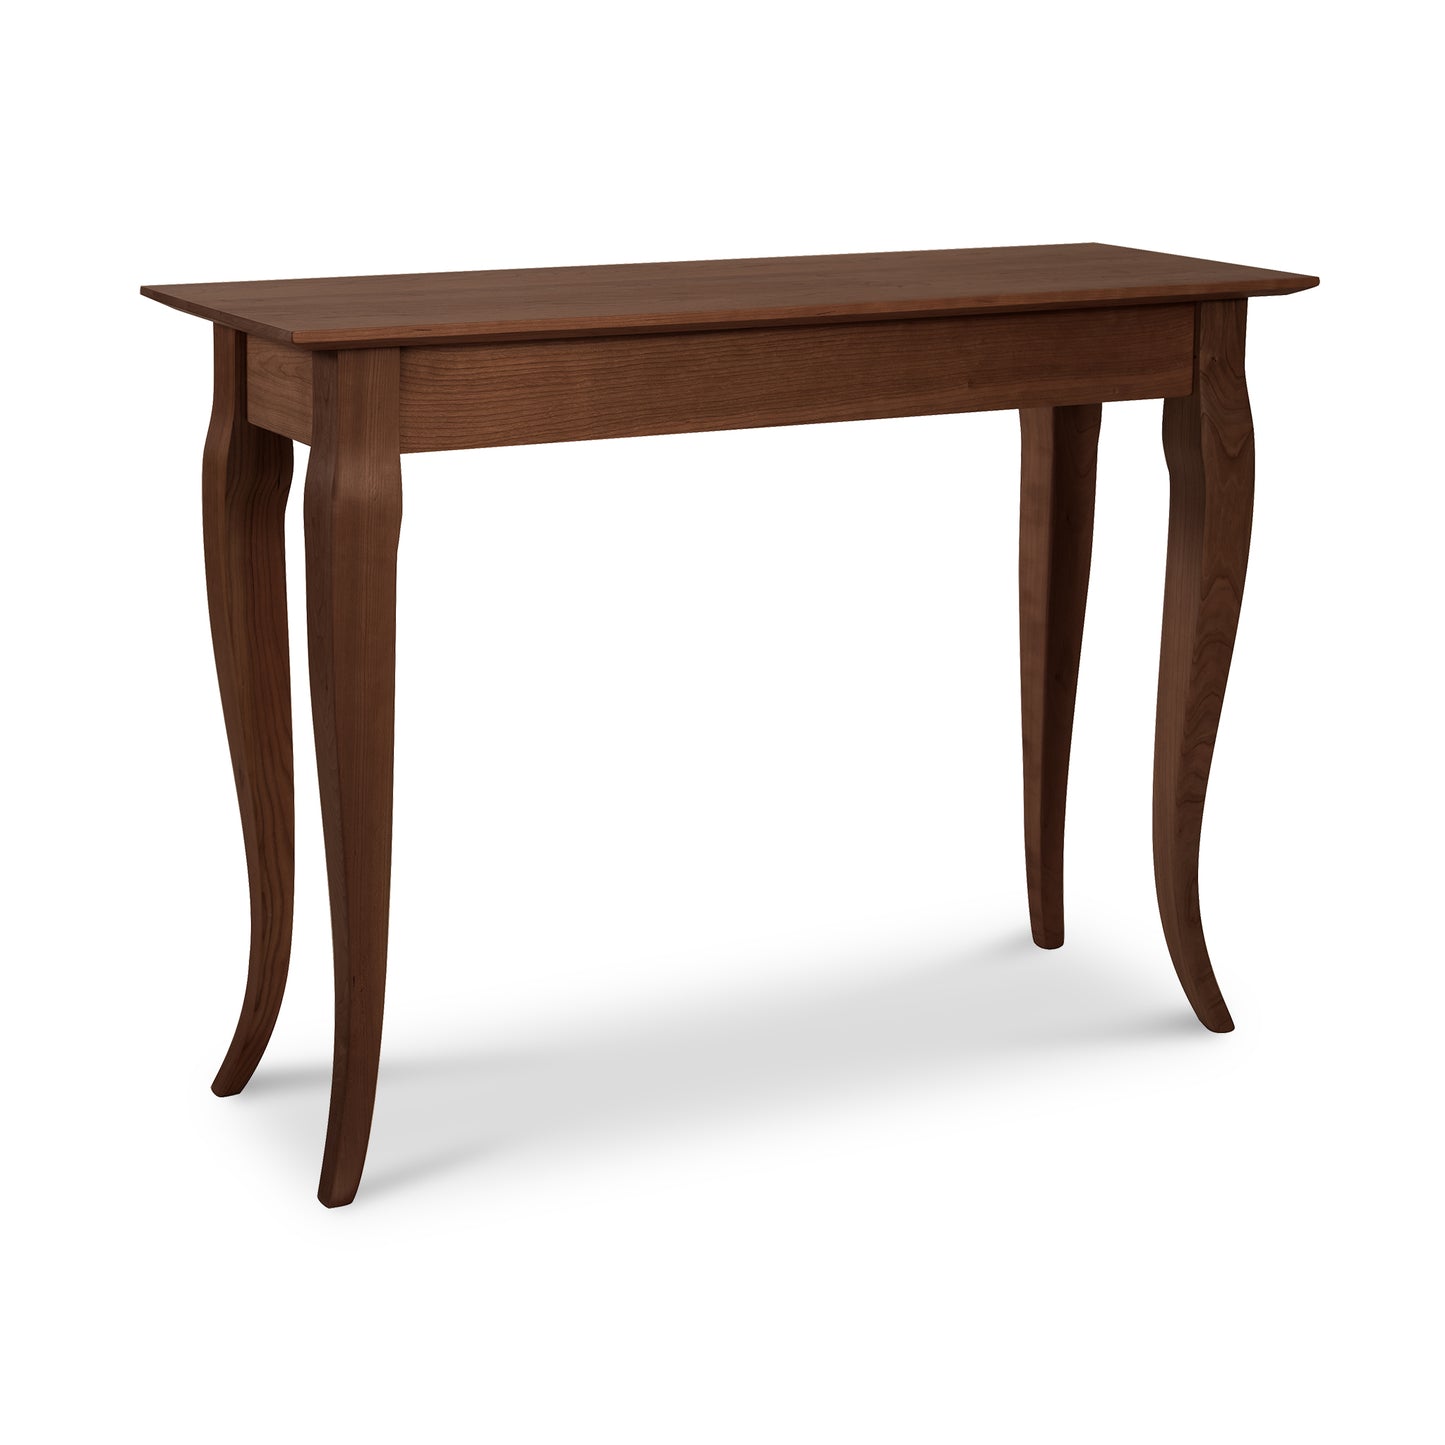 A customizable French Country Sofa Table with a wooden top and legs, made by Lyndon Furniture.